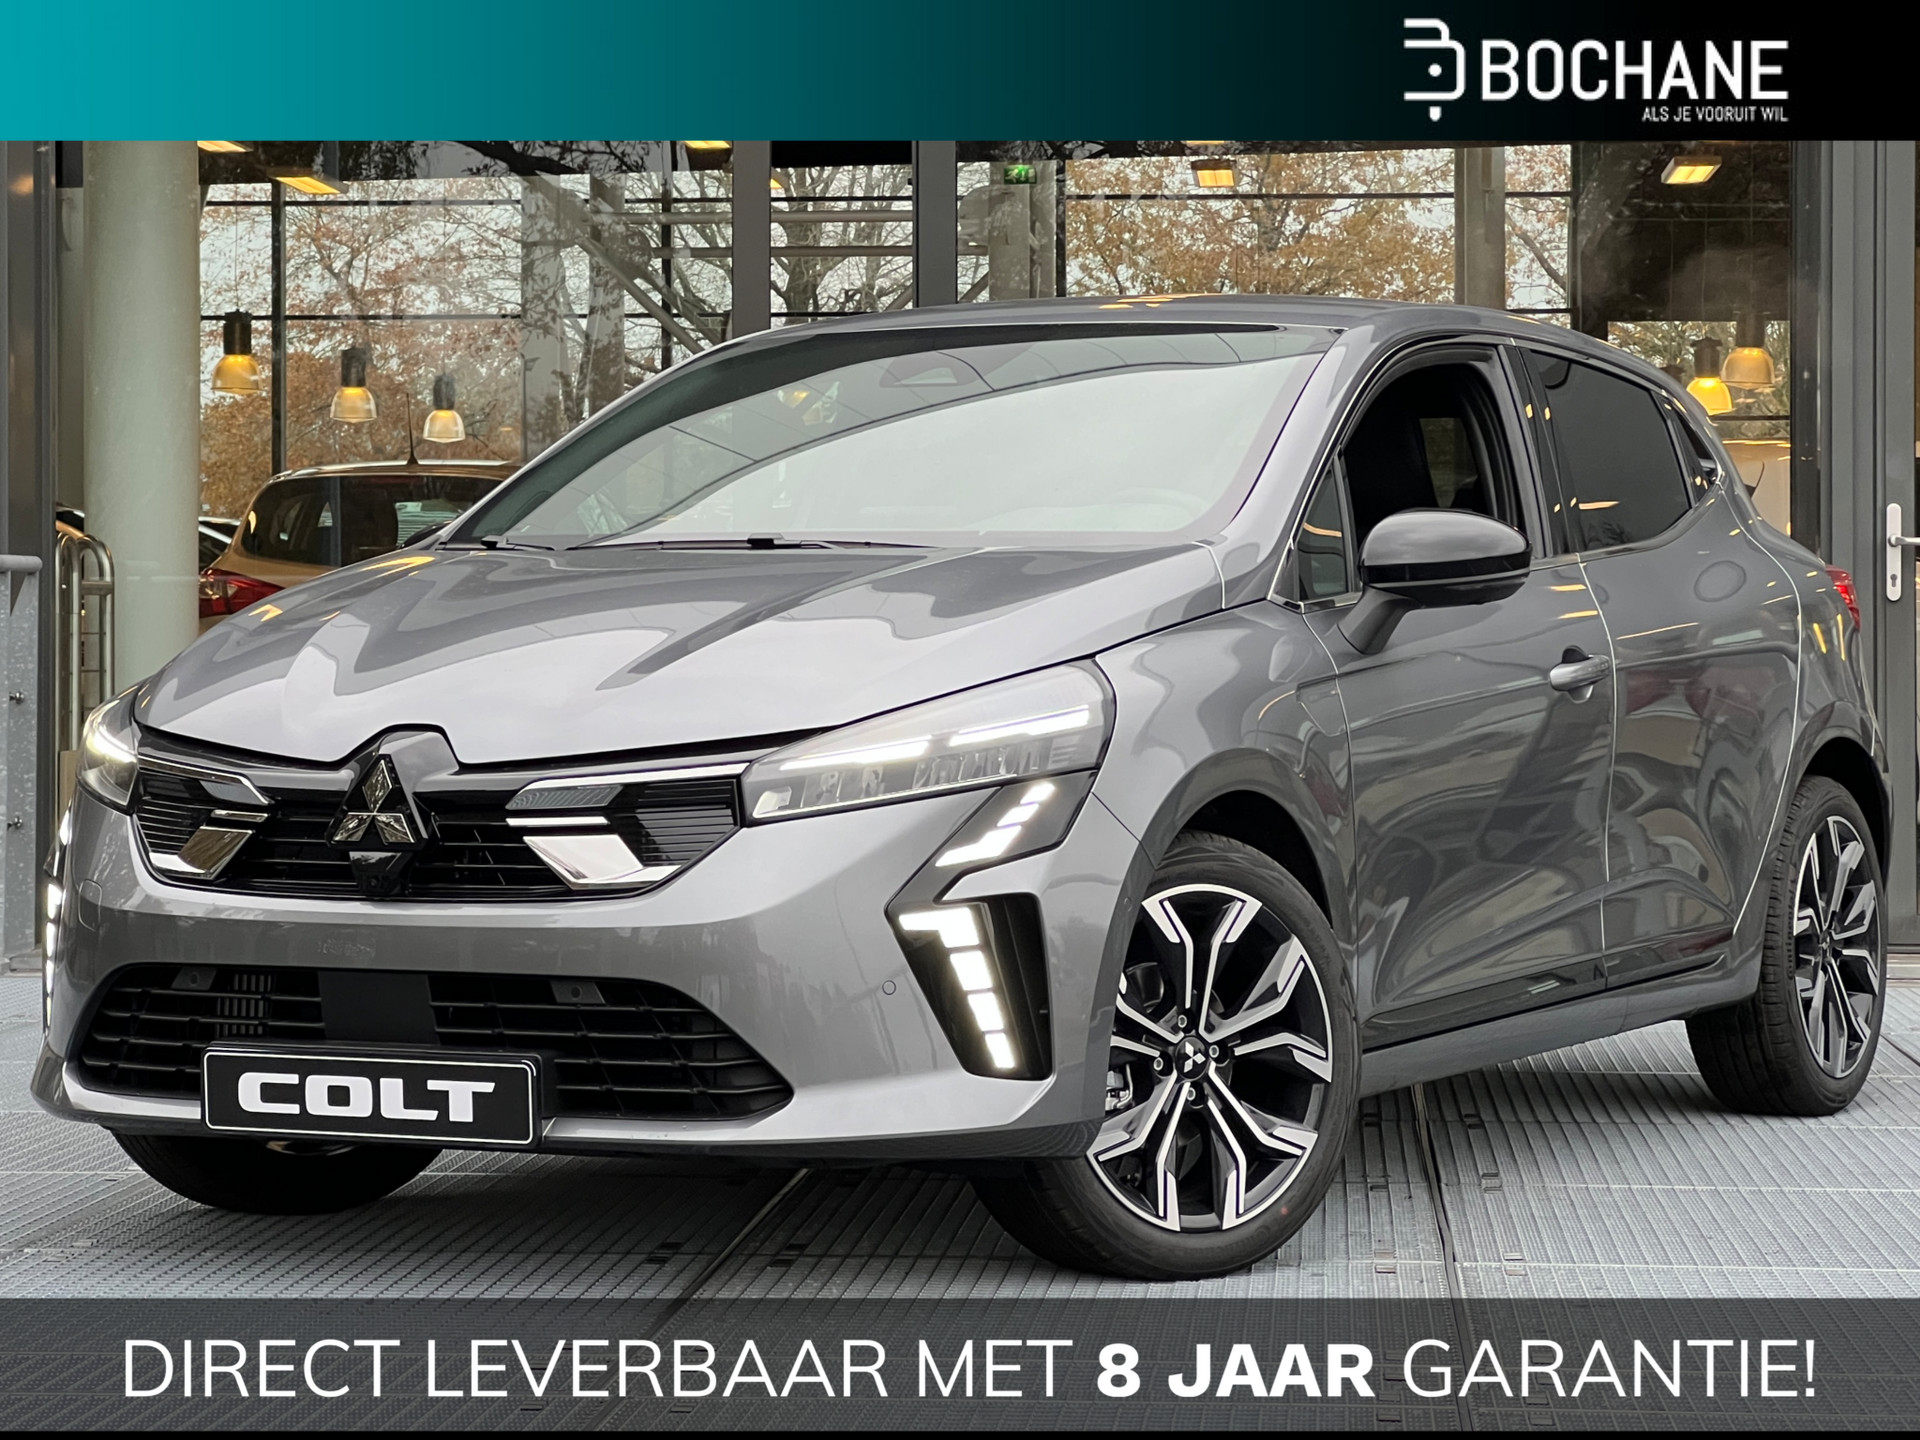 Mitsubishi Colt 1.0T MT Instyle | Draadloos Apple Carplay / Android Auto | Adap. Cruise Control | Climate Control | BOSE | DIRECT UIT VOORRAAD LEVERBAAR!